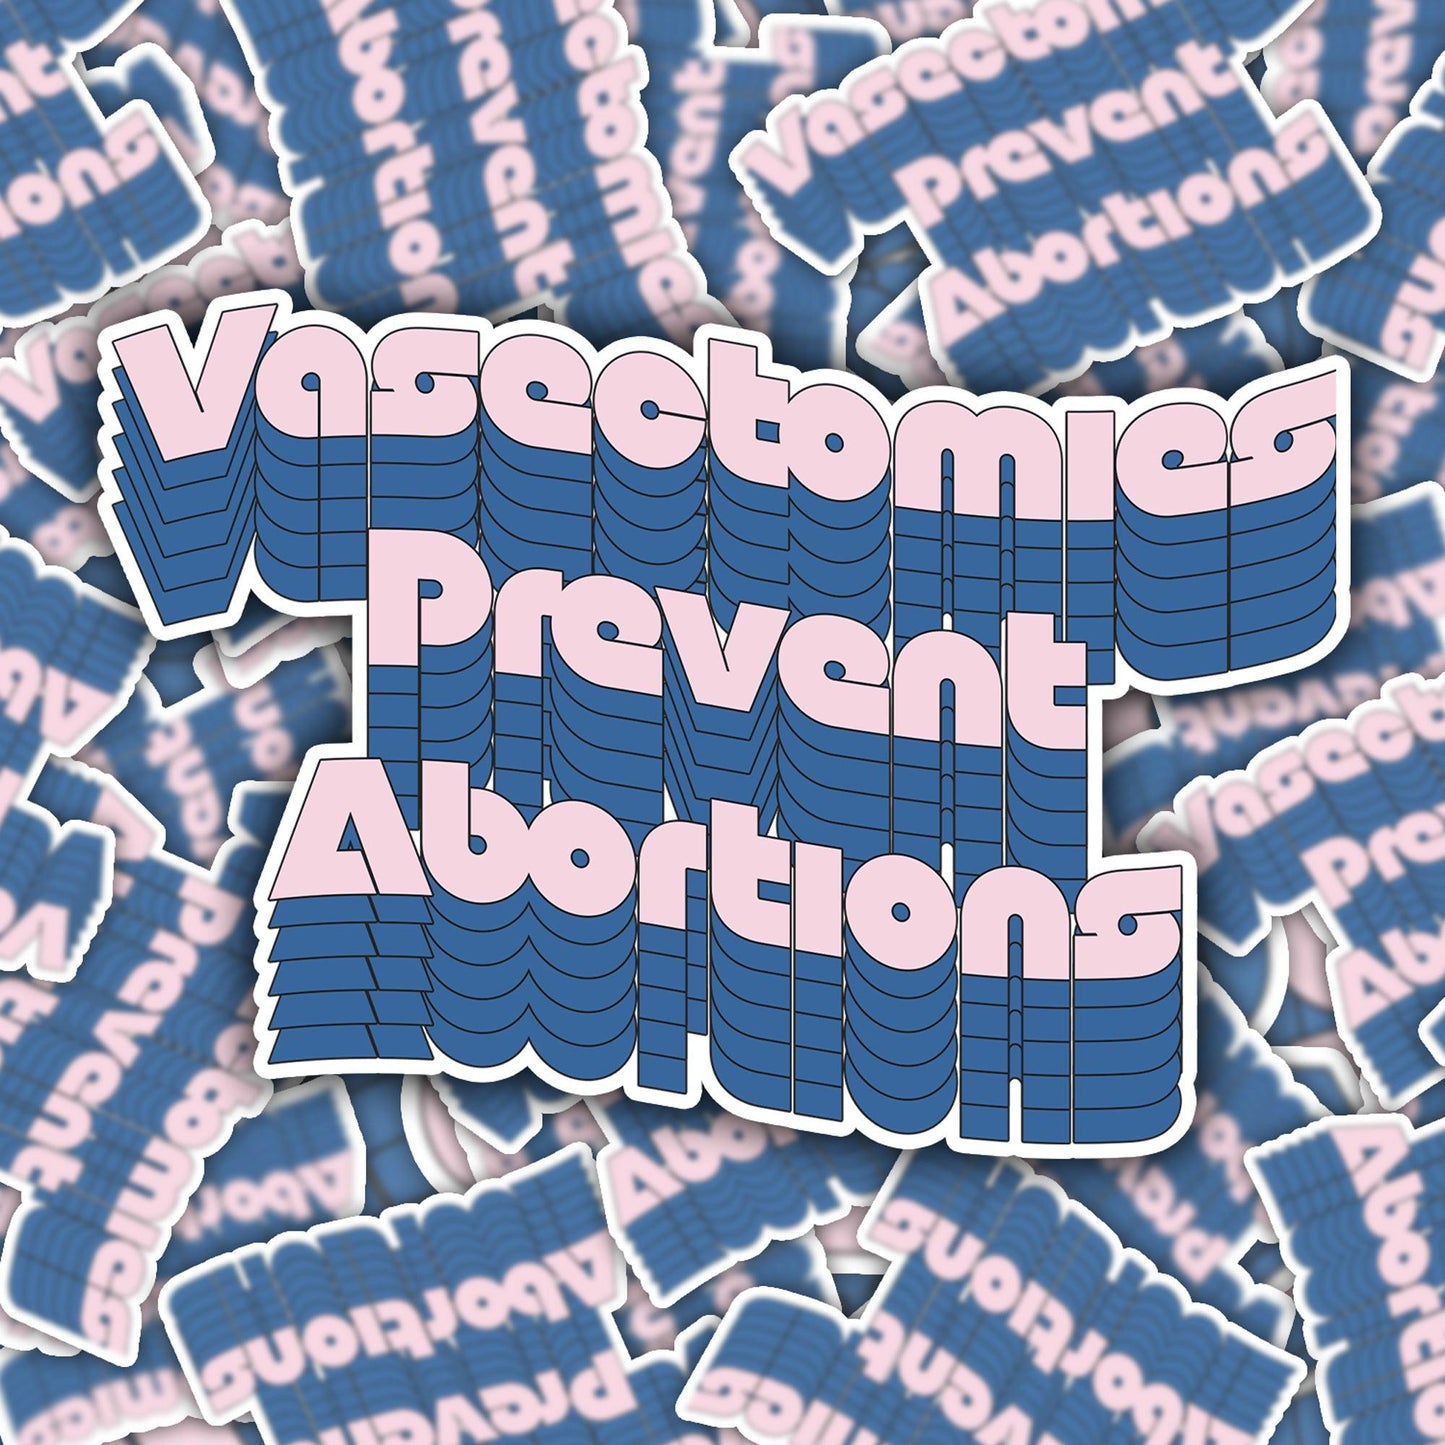 Vasectomies Prevent Abortions Funny Sticker-sticker-Crimson and Clover Studio